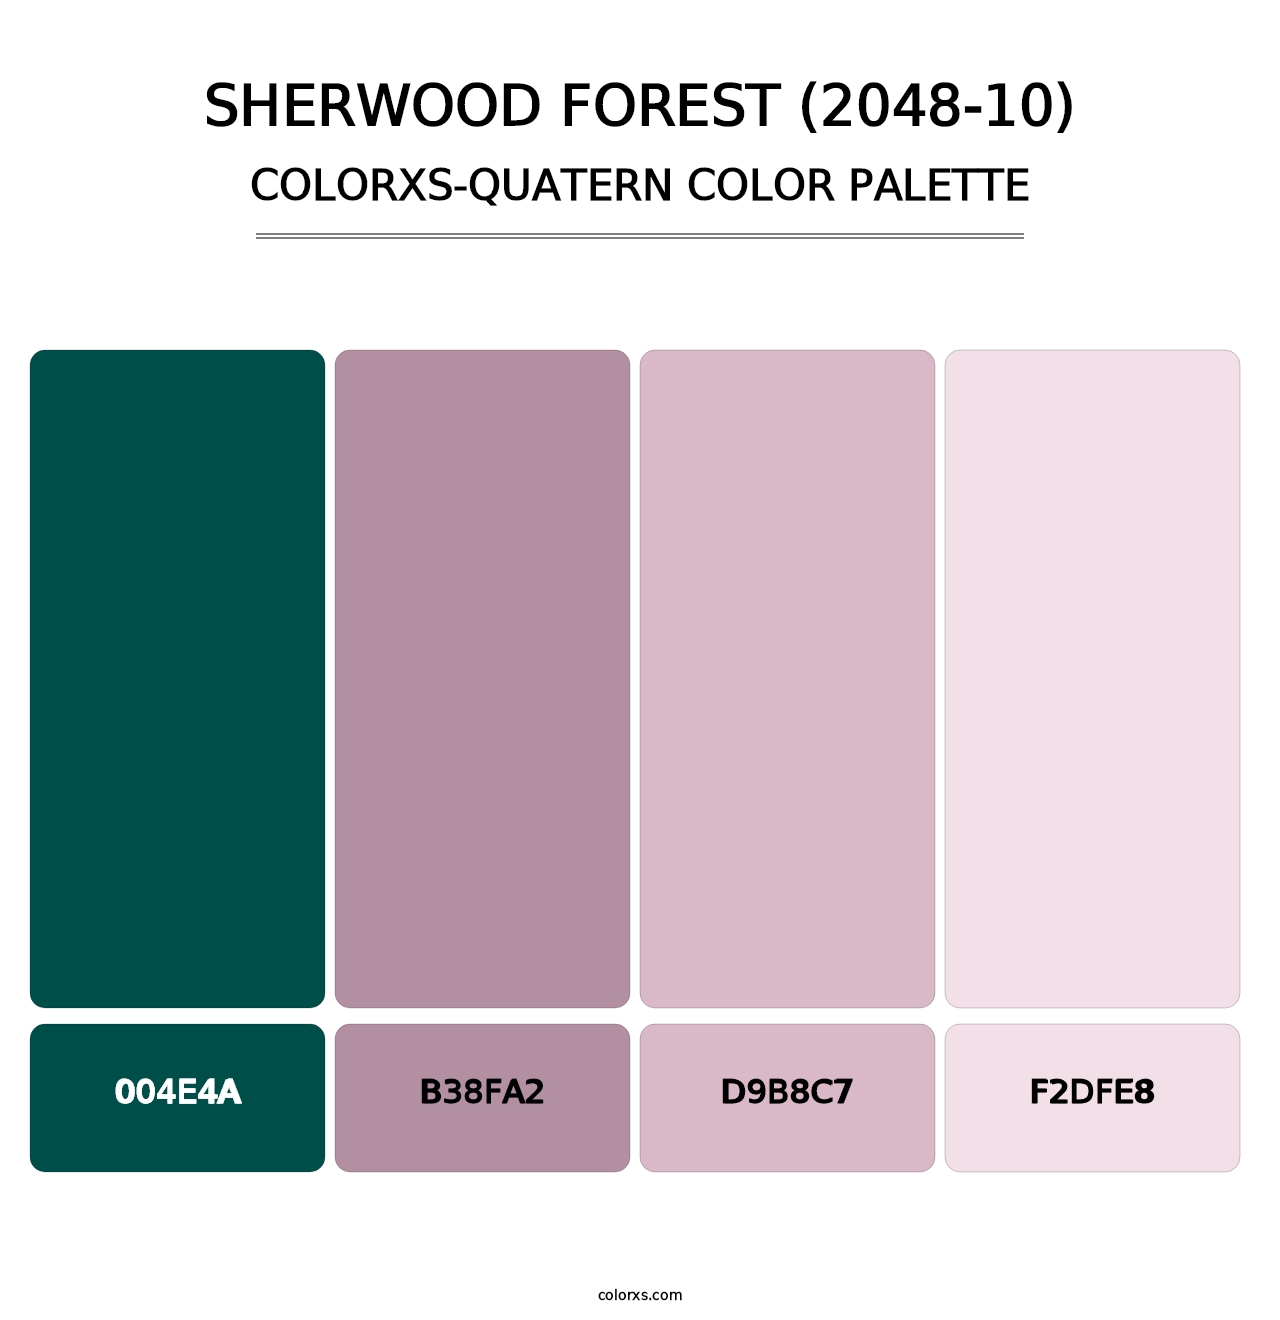 Sherwood Forest (2048-10) - Colorxs Quatern Palette